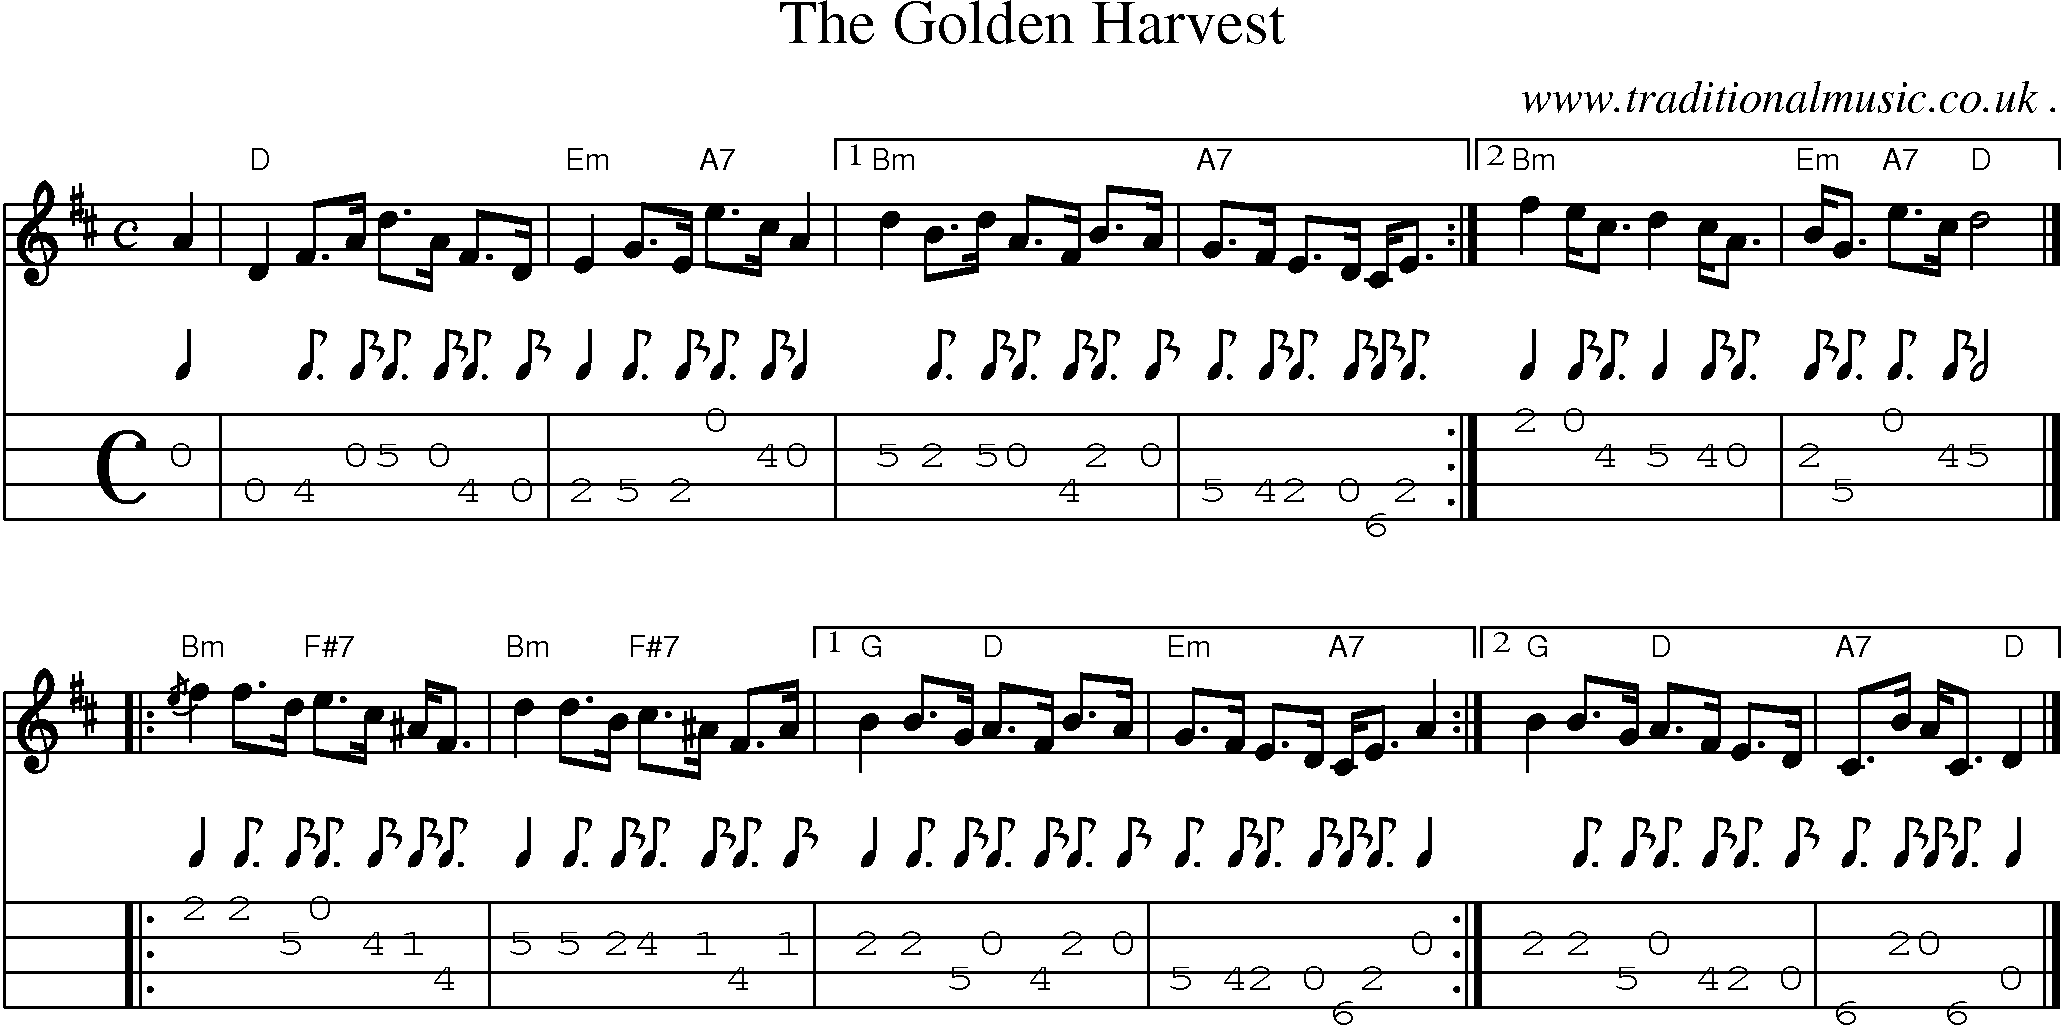 Sheet-music  score, Chords and Mandolin Tabs for The Golden Harvest